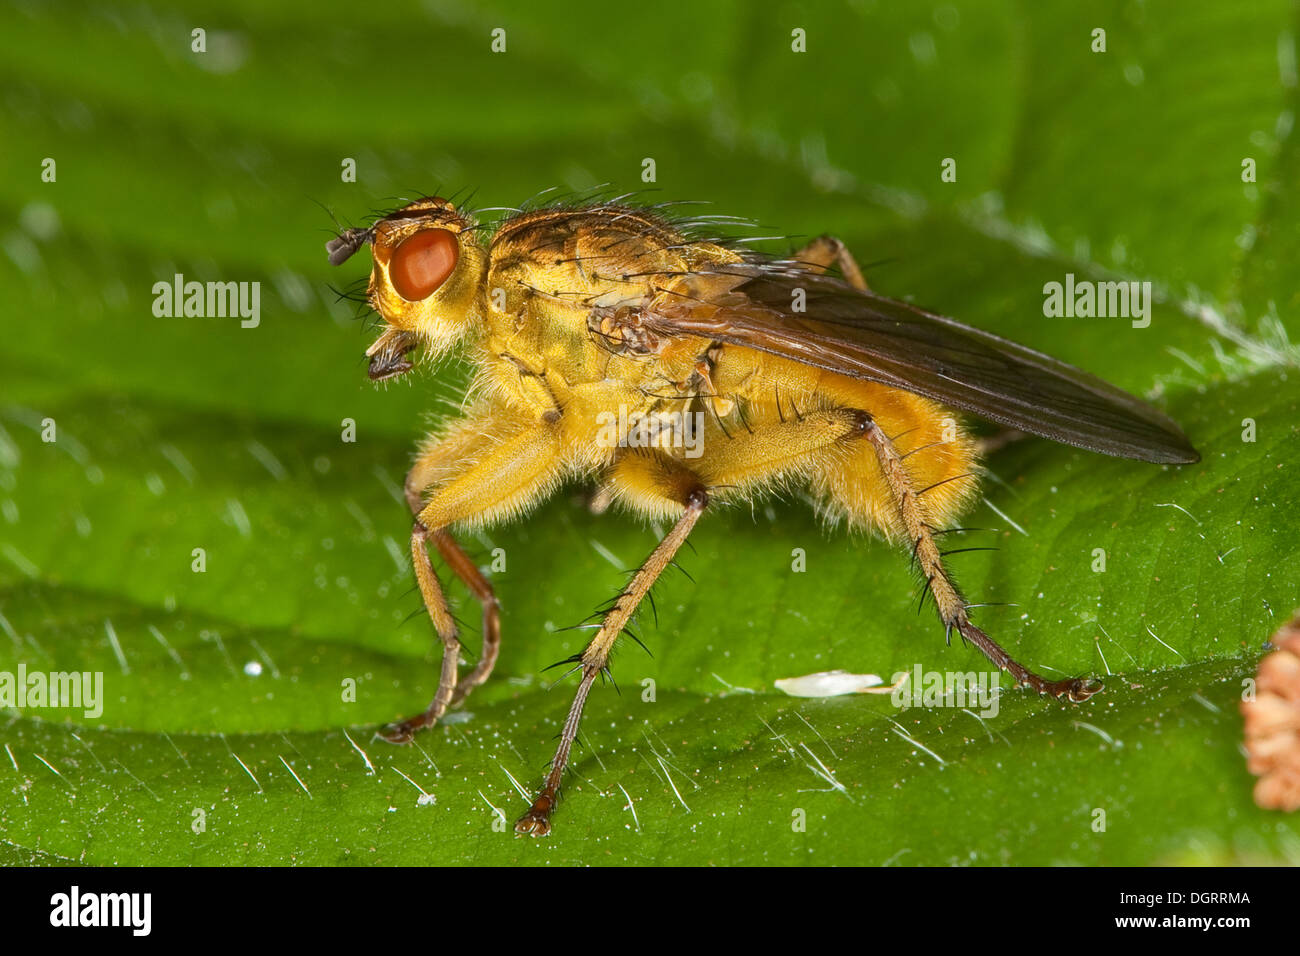 yellow dungfly, yellow dung fly, Gelbe Dungfliege, Mistfliege, Scathophaga stercoraria, Scatophaga stercoraria Stock Photo